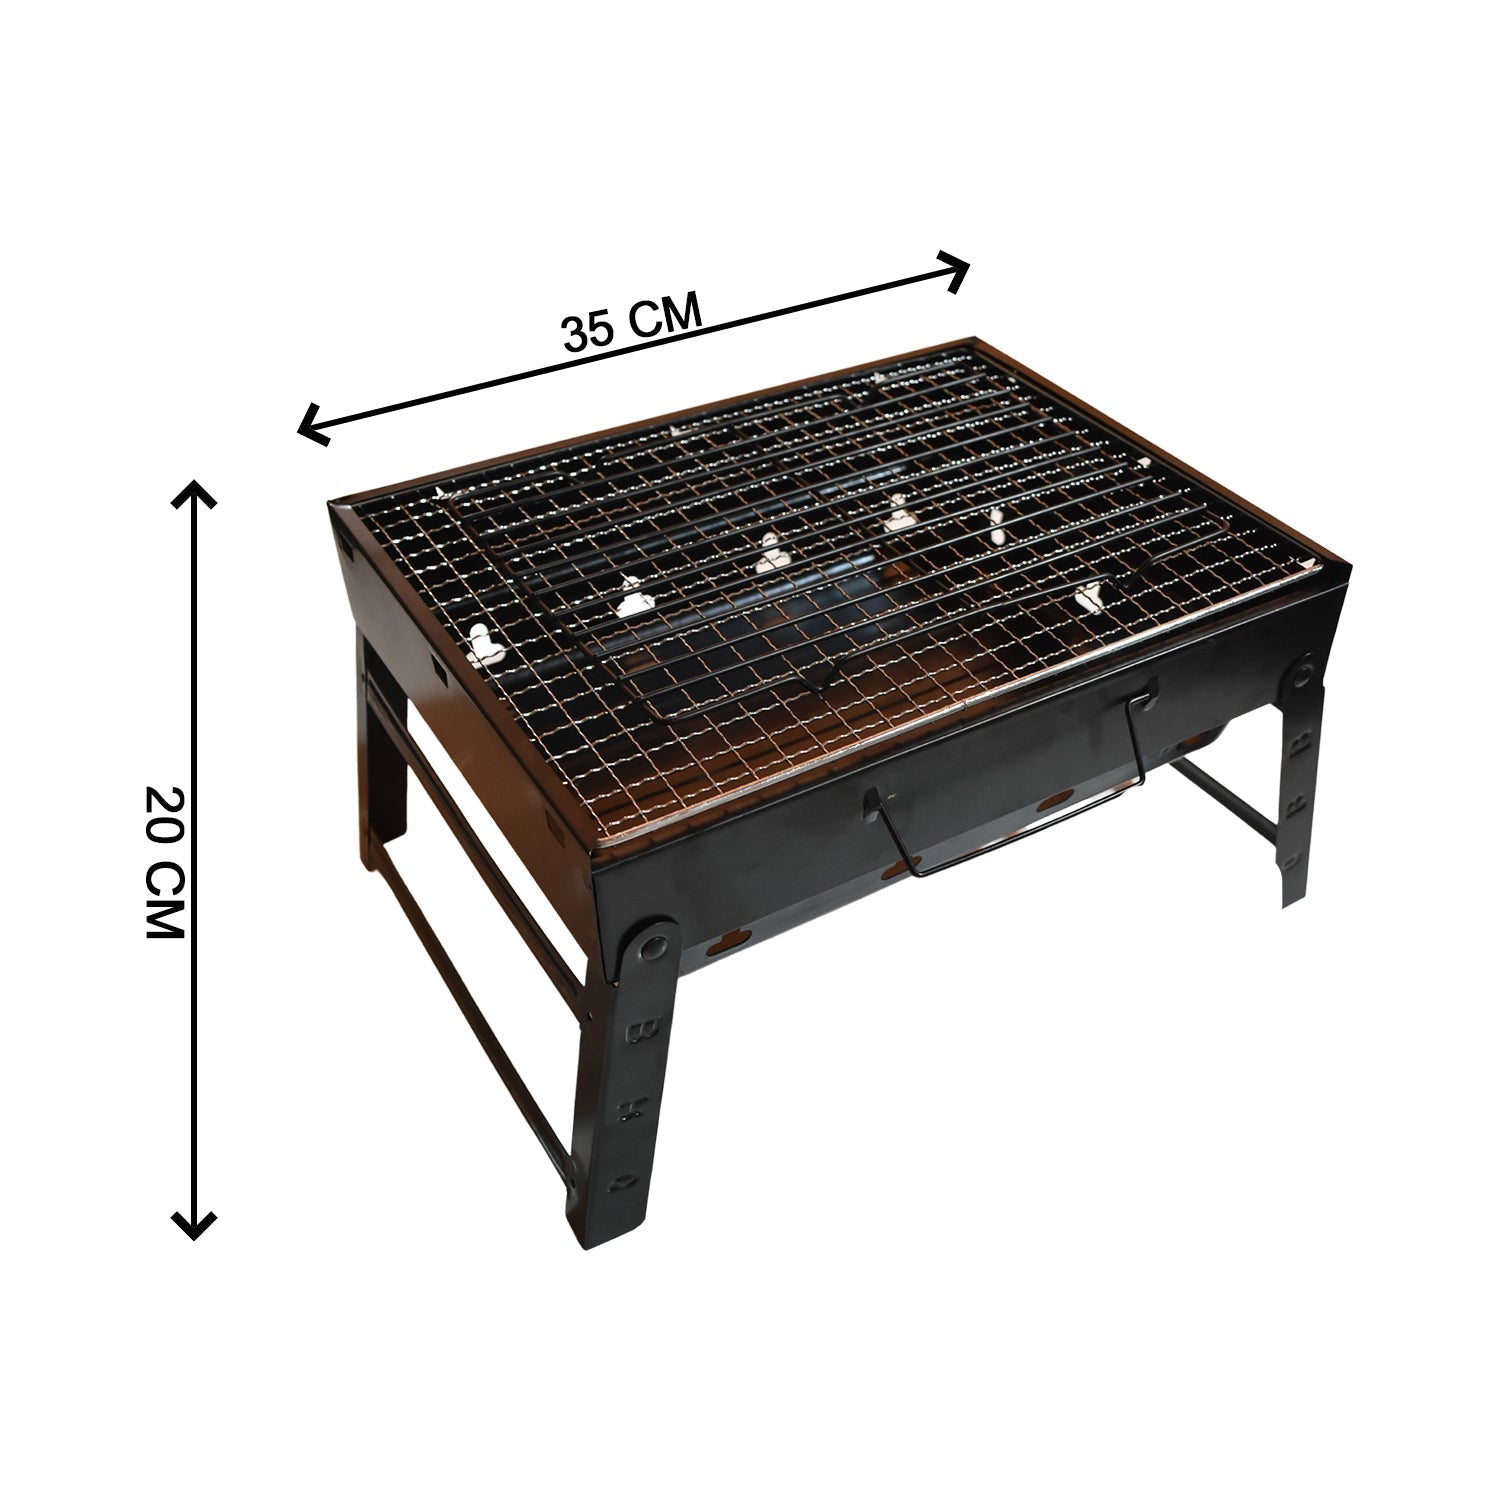 0126 A Barbecue Grill used for making barbecue of types of food stuffs like vegetables, chicken meat etc.